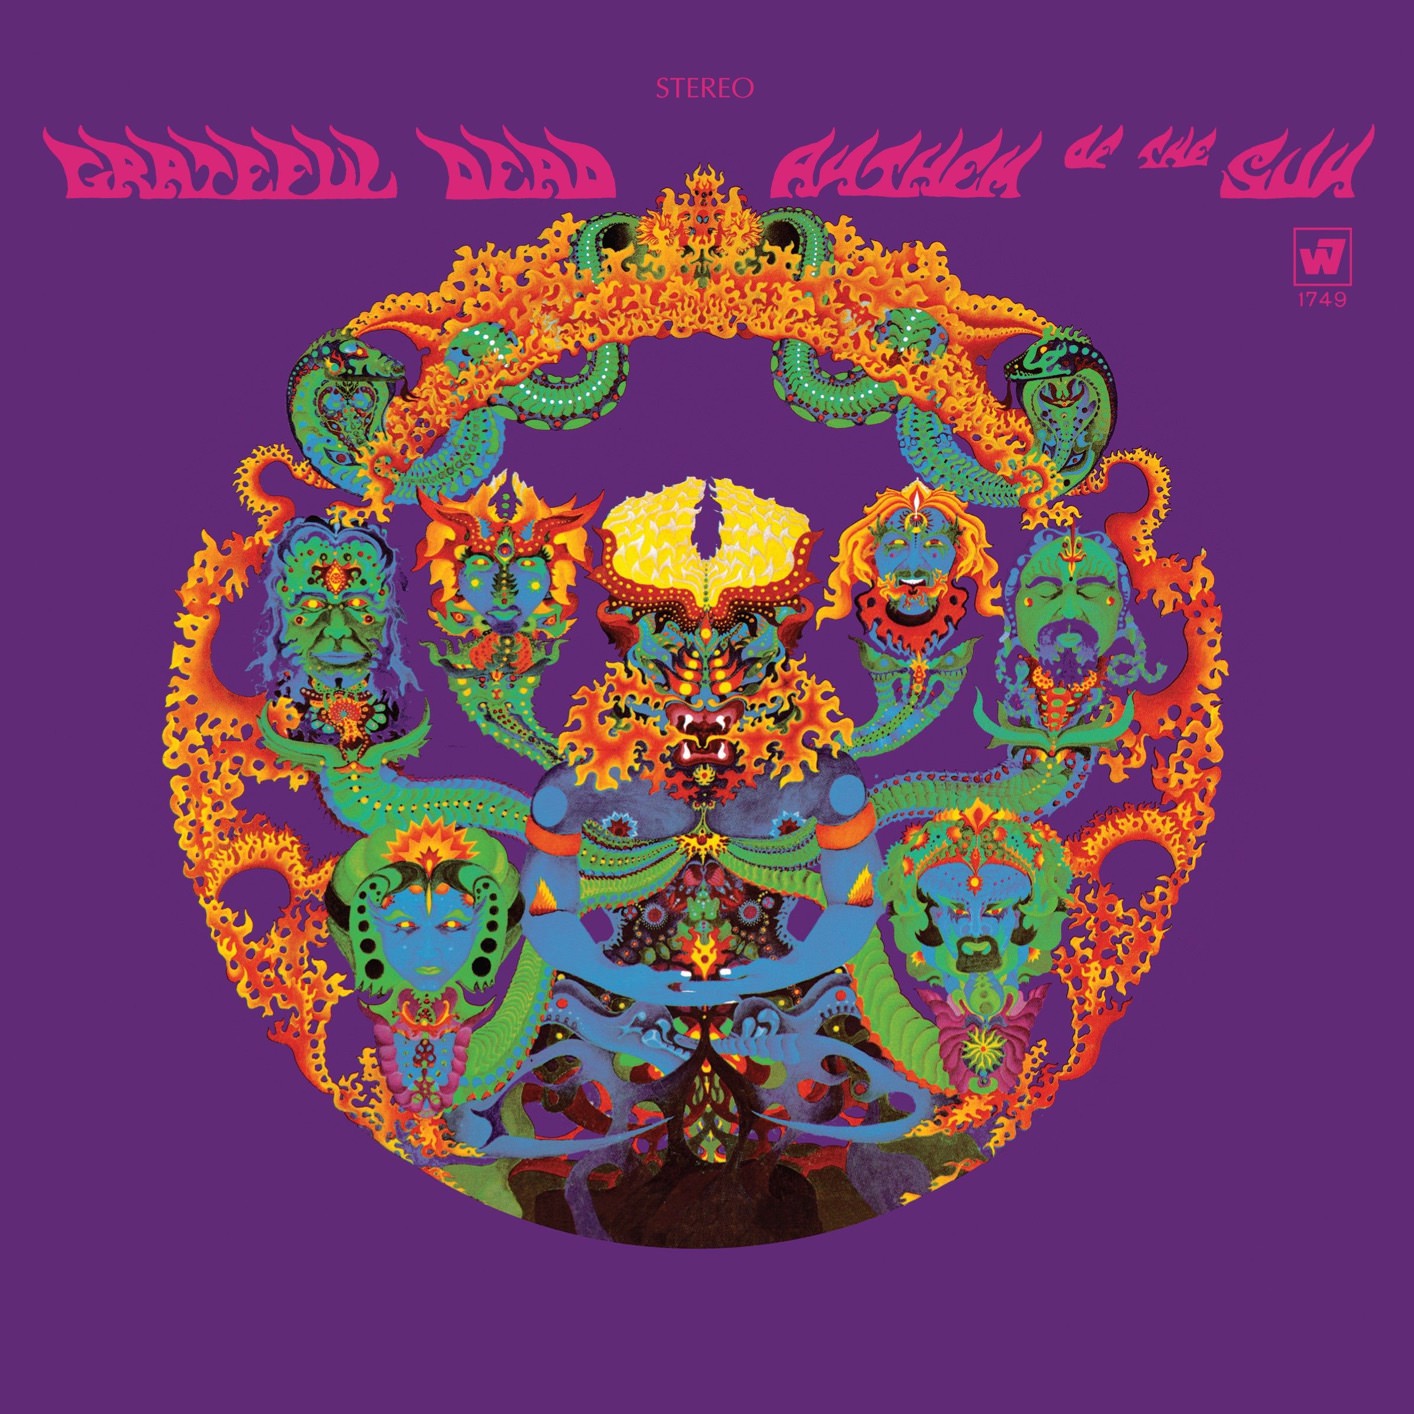 Grateful Dead - Anthem Of The Sun (50th Anniversary Deluxe Edition) (1968/2018) [FLAC 24bit/192kHz]